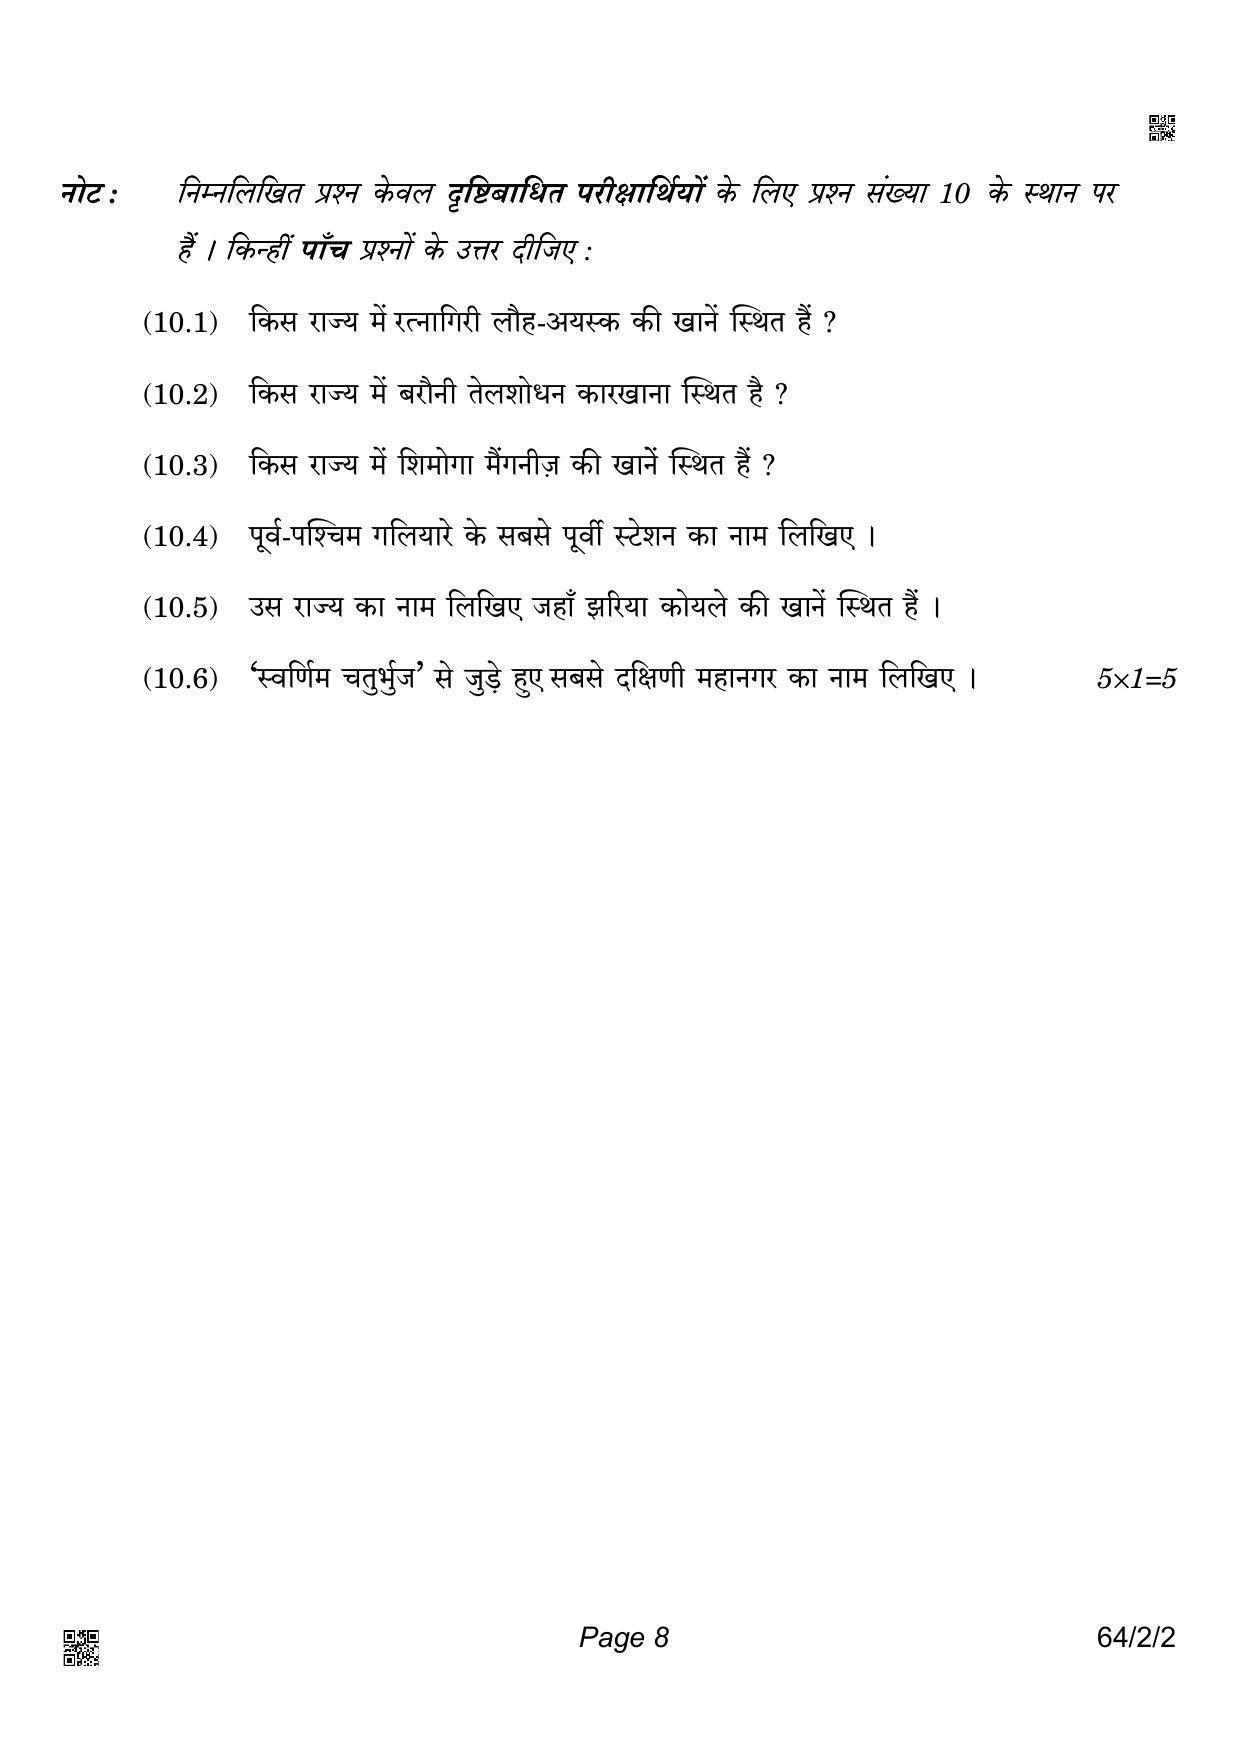 CBSE Class 12 64-2-2 Geography 2022 Question Paper - Page 8